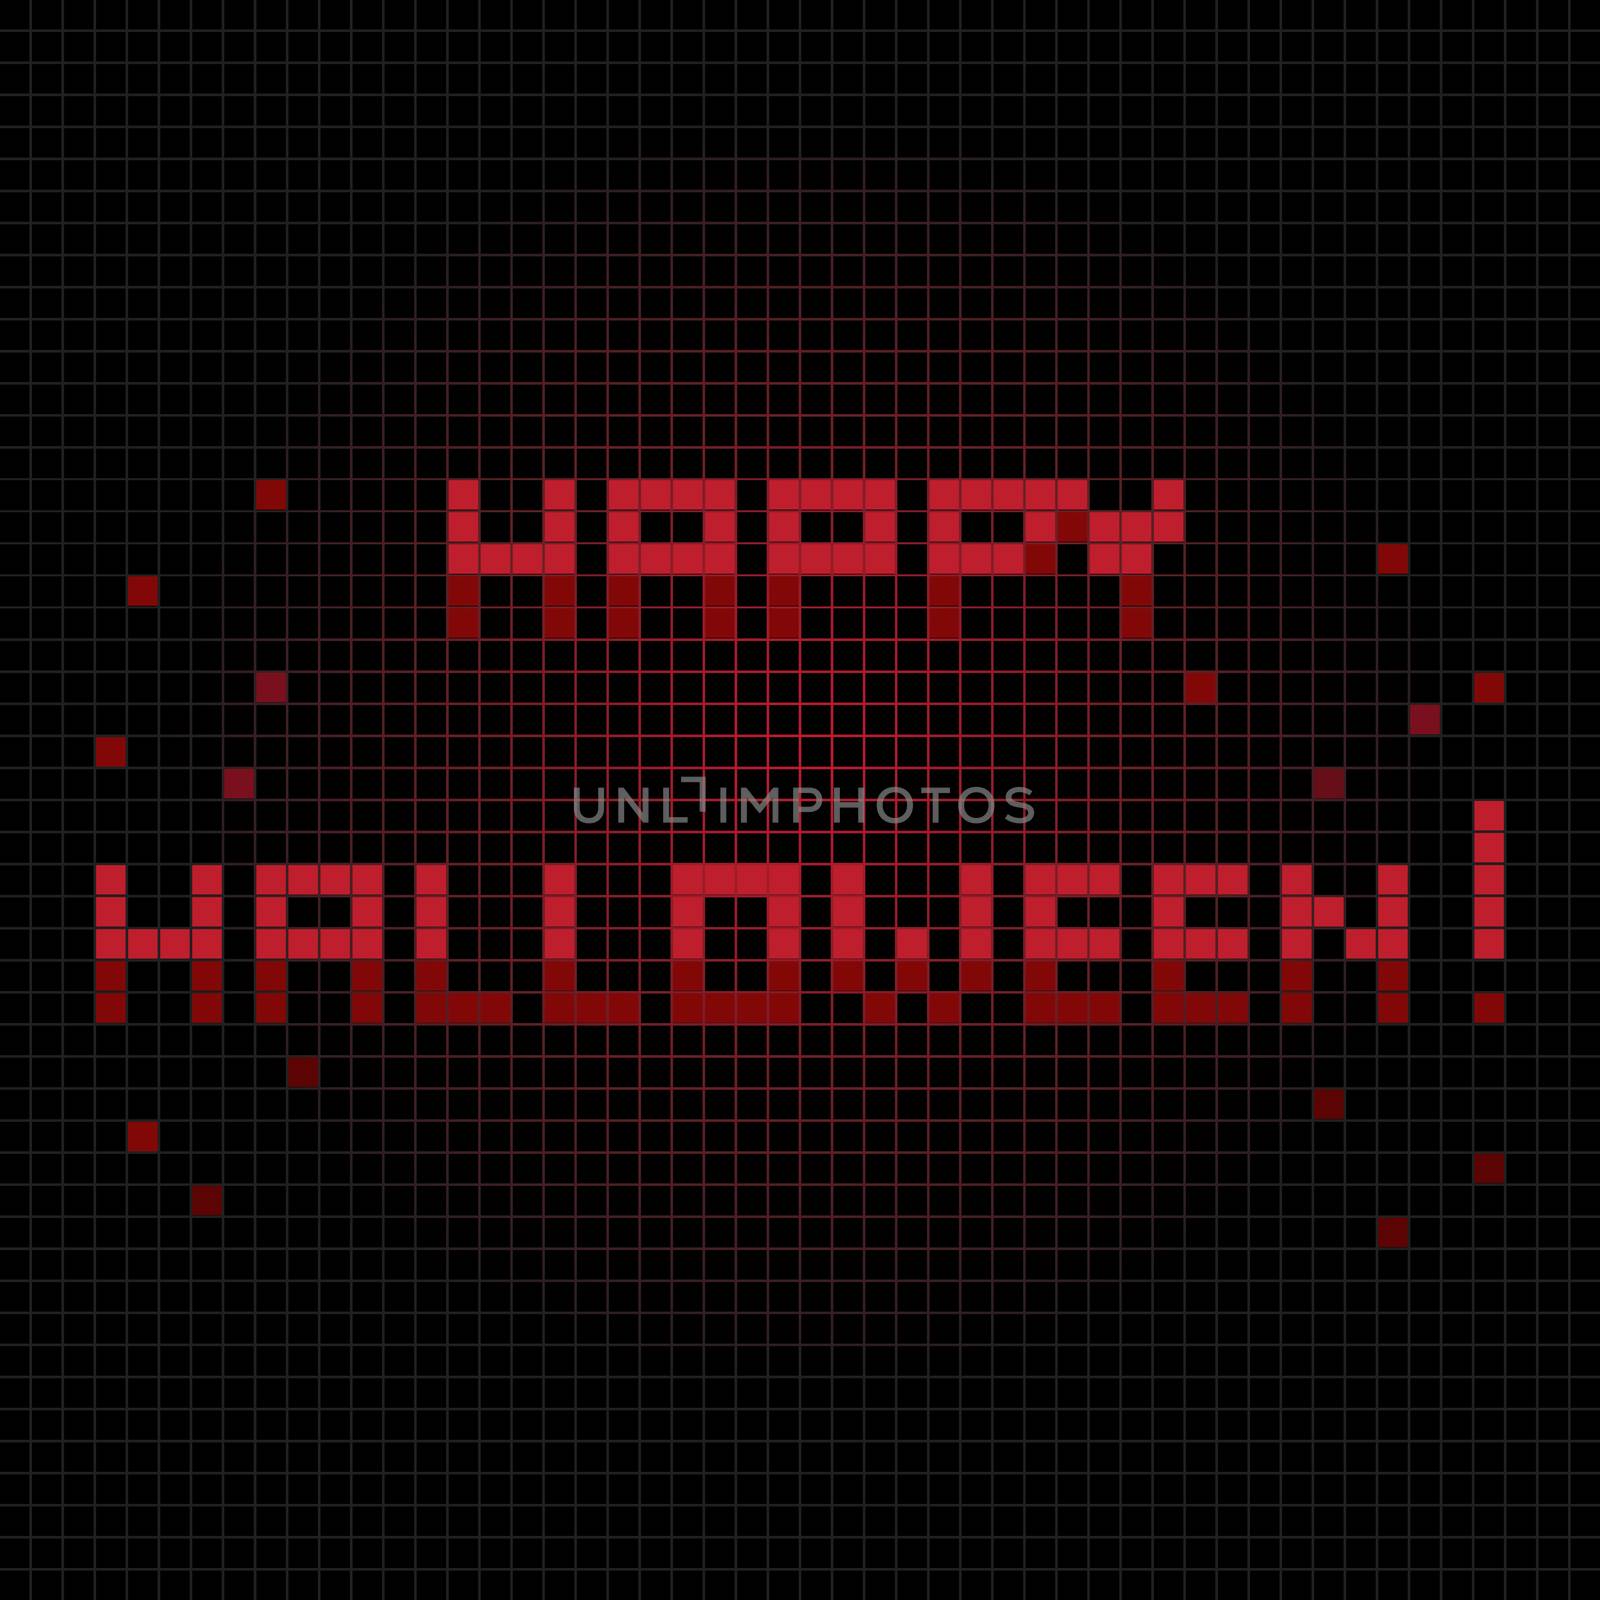 Halloween greetings card, pixel illustration of a scoreboard composition with digital  text and blood sprinkles